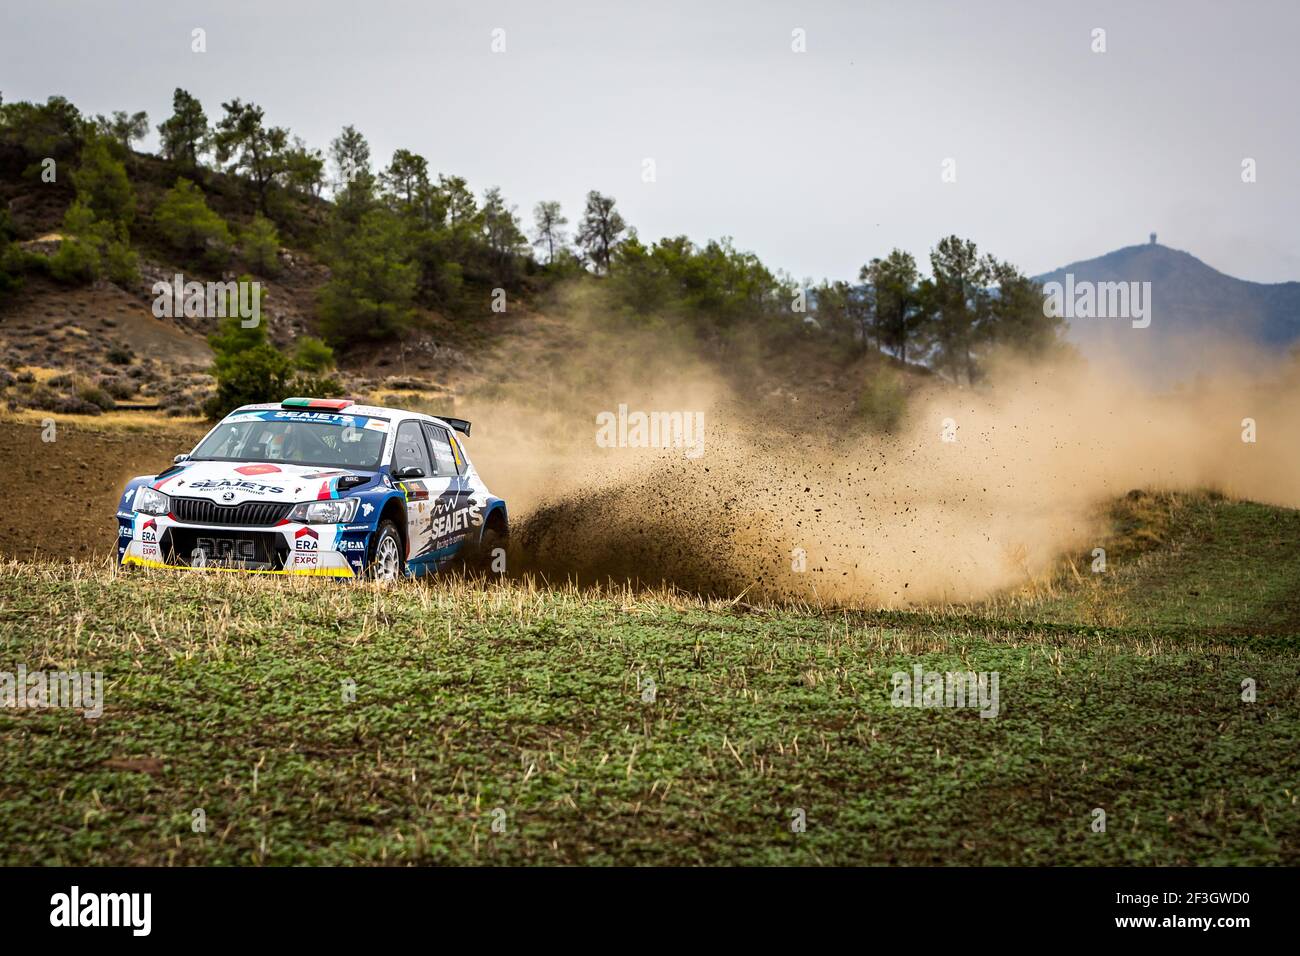 02 MAGALHAES Bruno (PRT), MAGALHAES, Hugo (PRT), BRUNO MIGUEL PINTO MAGALHAES PINHEIRO, SKODA FABIA R5, action during the 2018 European Rally Championship ERC Cyprus Rally, from june 15 to 17 at Larnaca, Cyprus - Photo Thomas Fenetre / DPPI Stock Photo